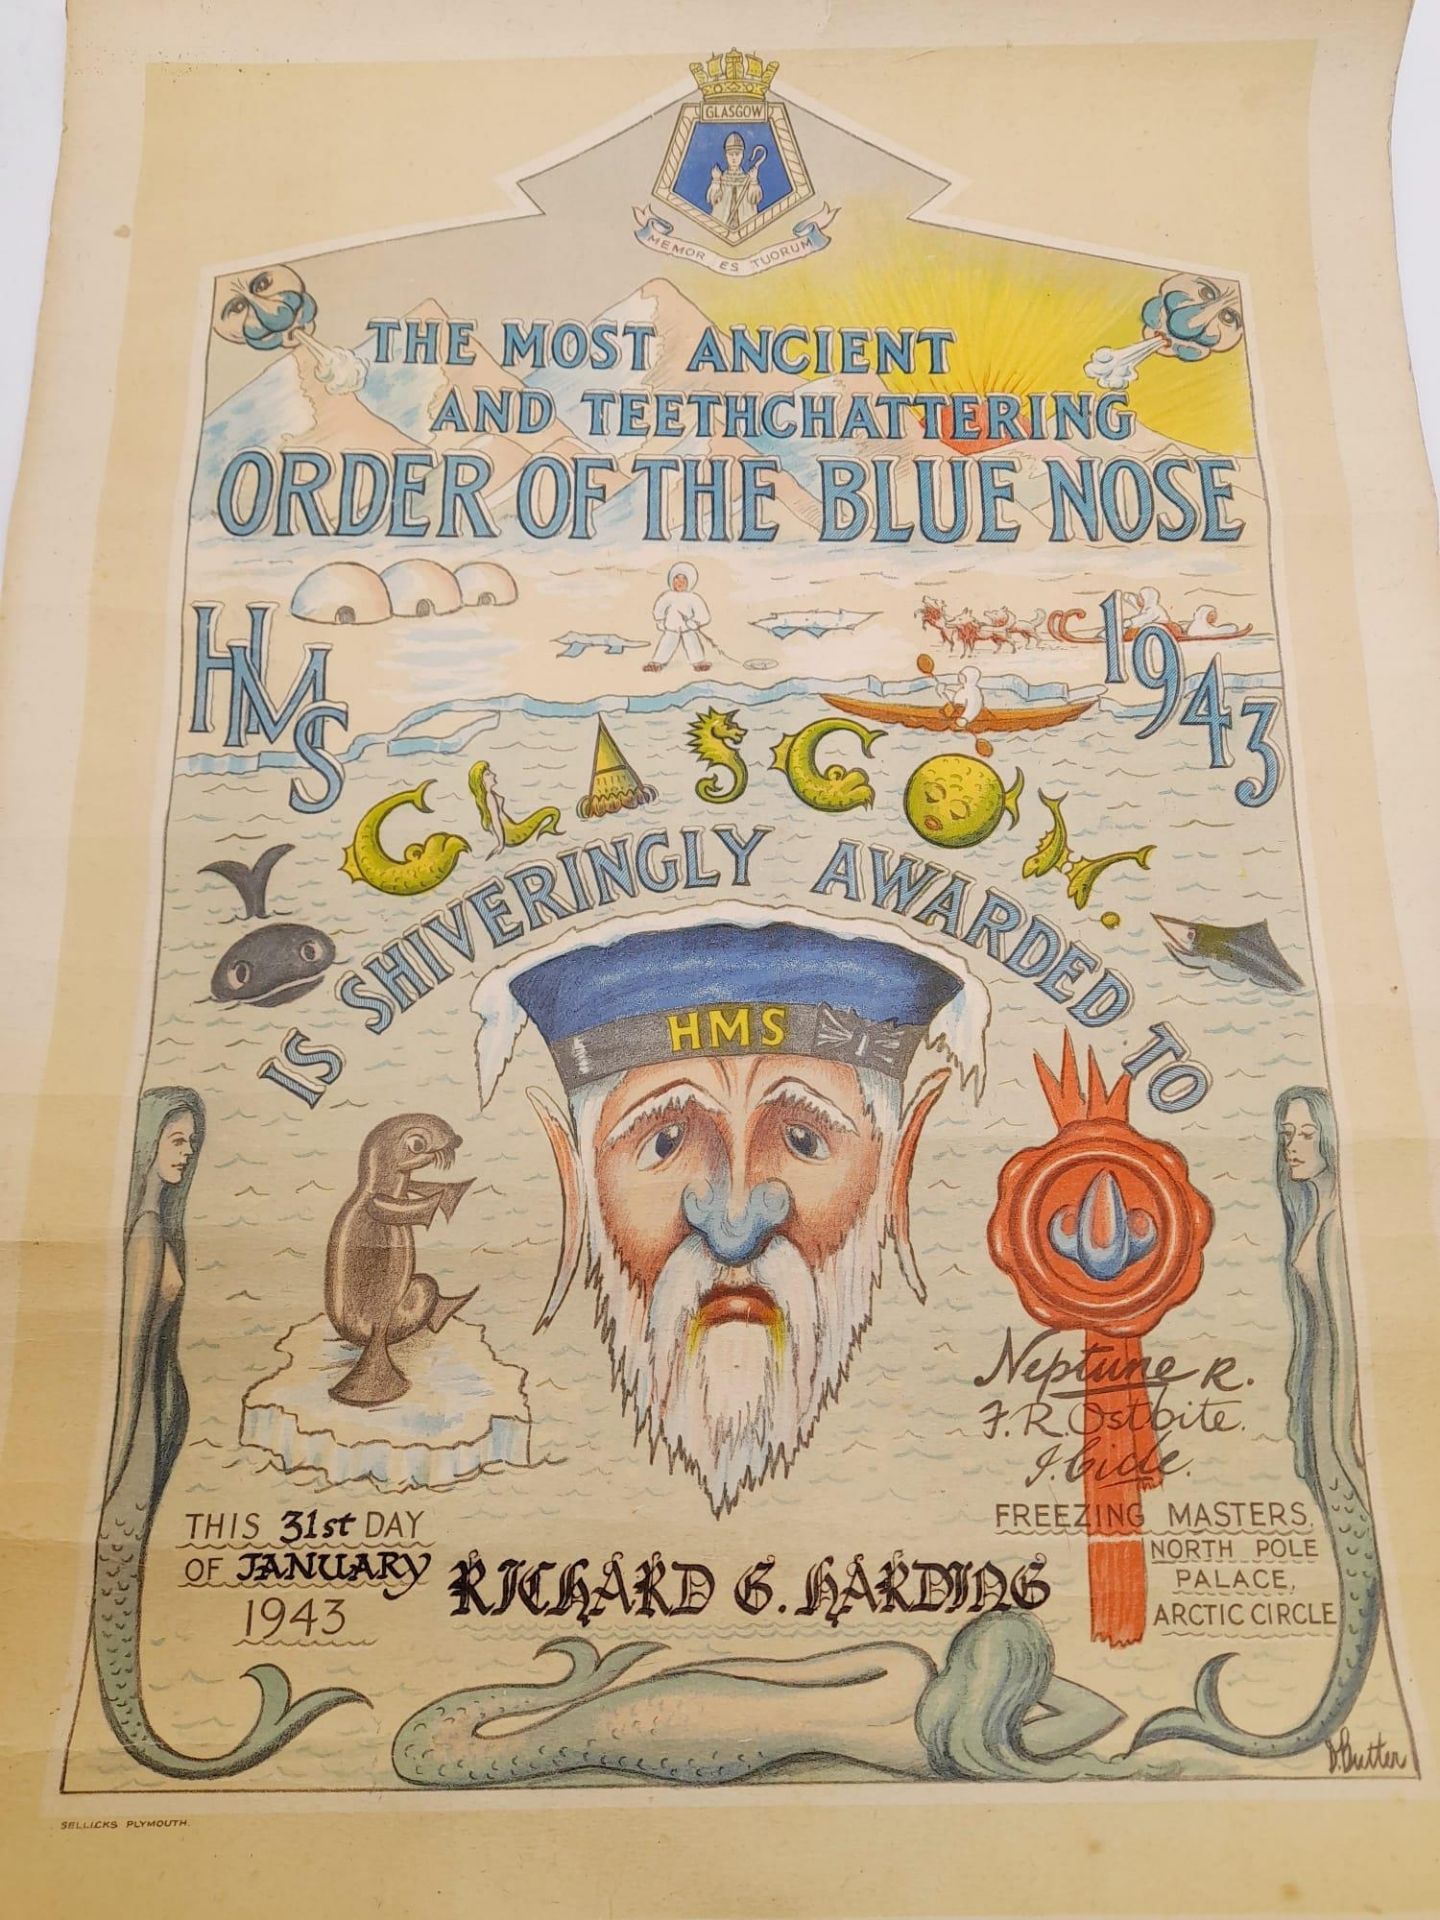 An Original Dated 1943 Poster Award known as the ‘Order of the Blue Nose’ for Sailors crossing the - Image 6 of 7